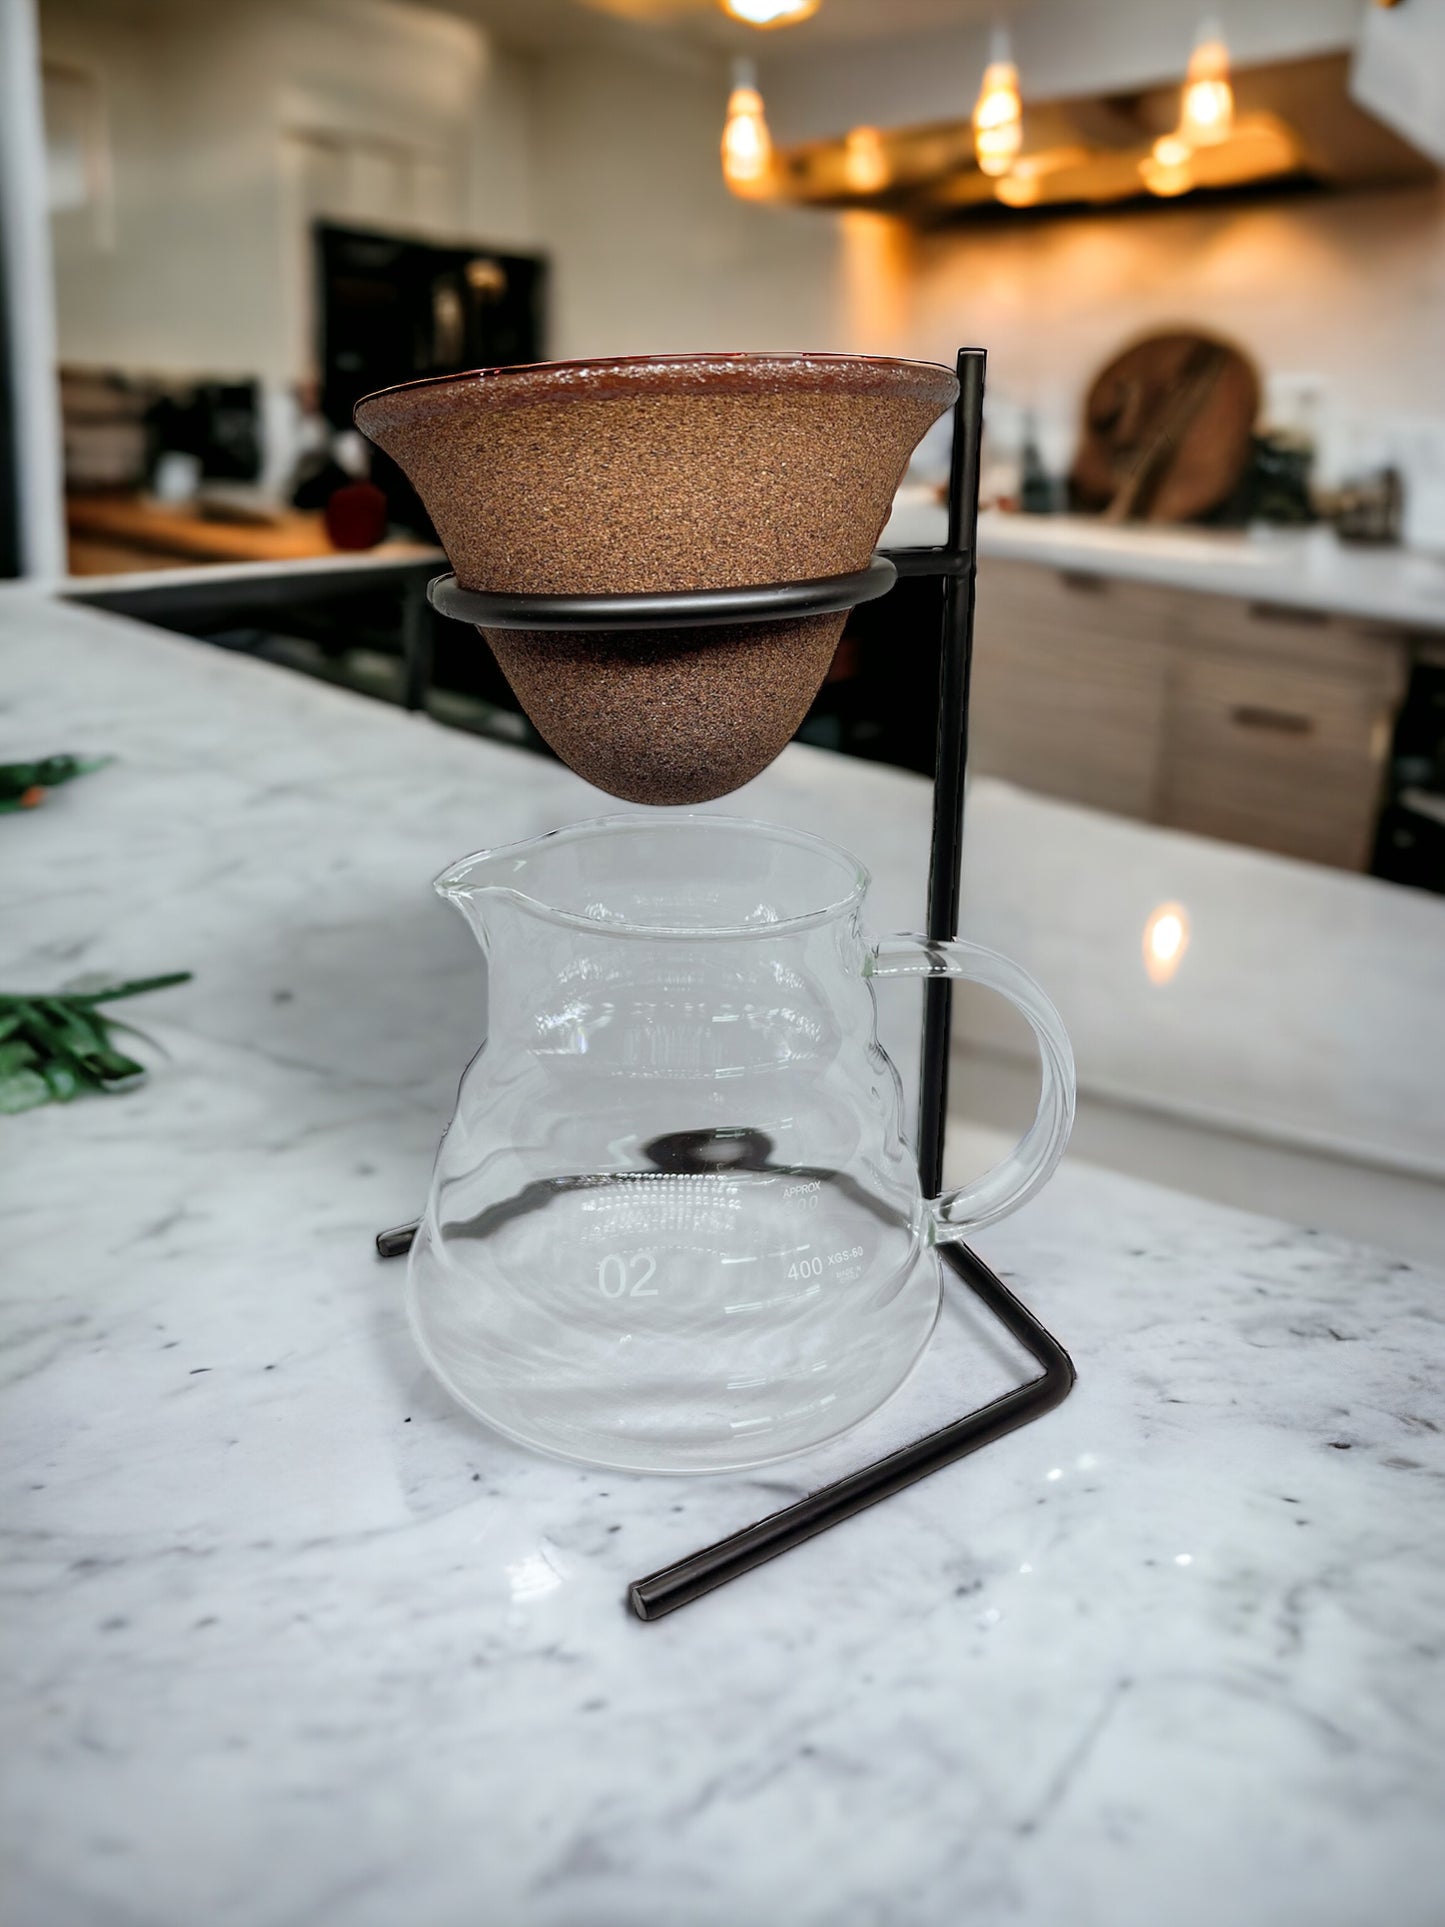 Clay Coffee Filter + Hand Brew Coffee Rack